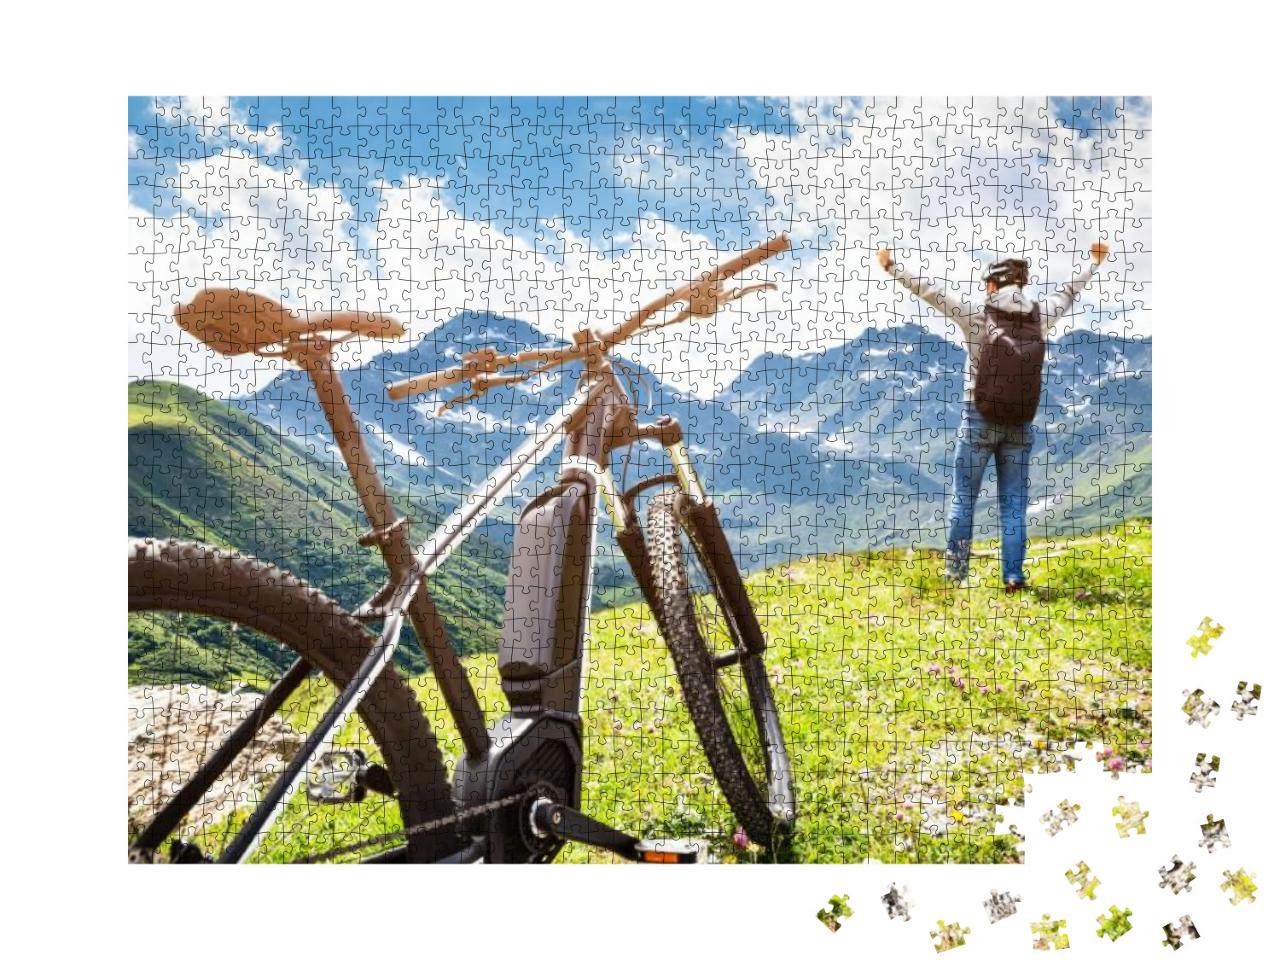 Mountain E Bike in Austria. Ebike Bicycle... Jigsaw Puzzle with 1000 pieces